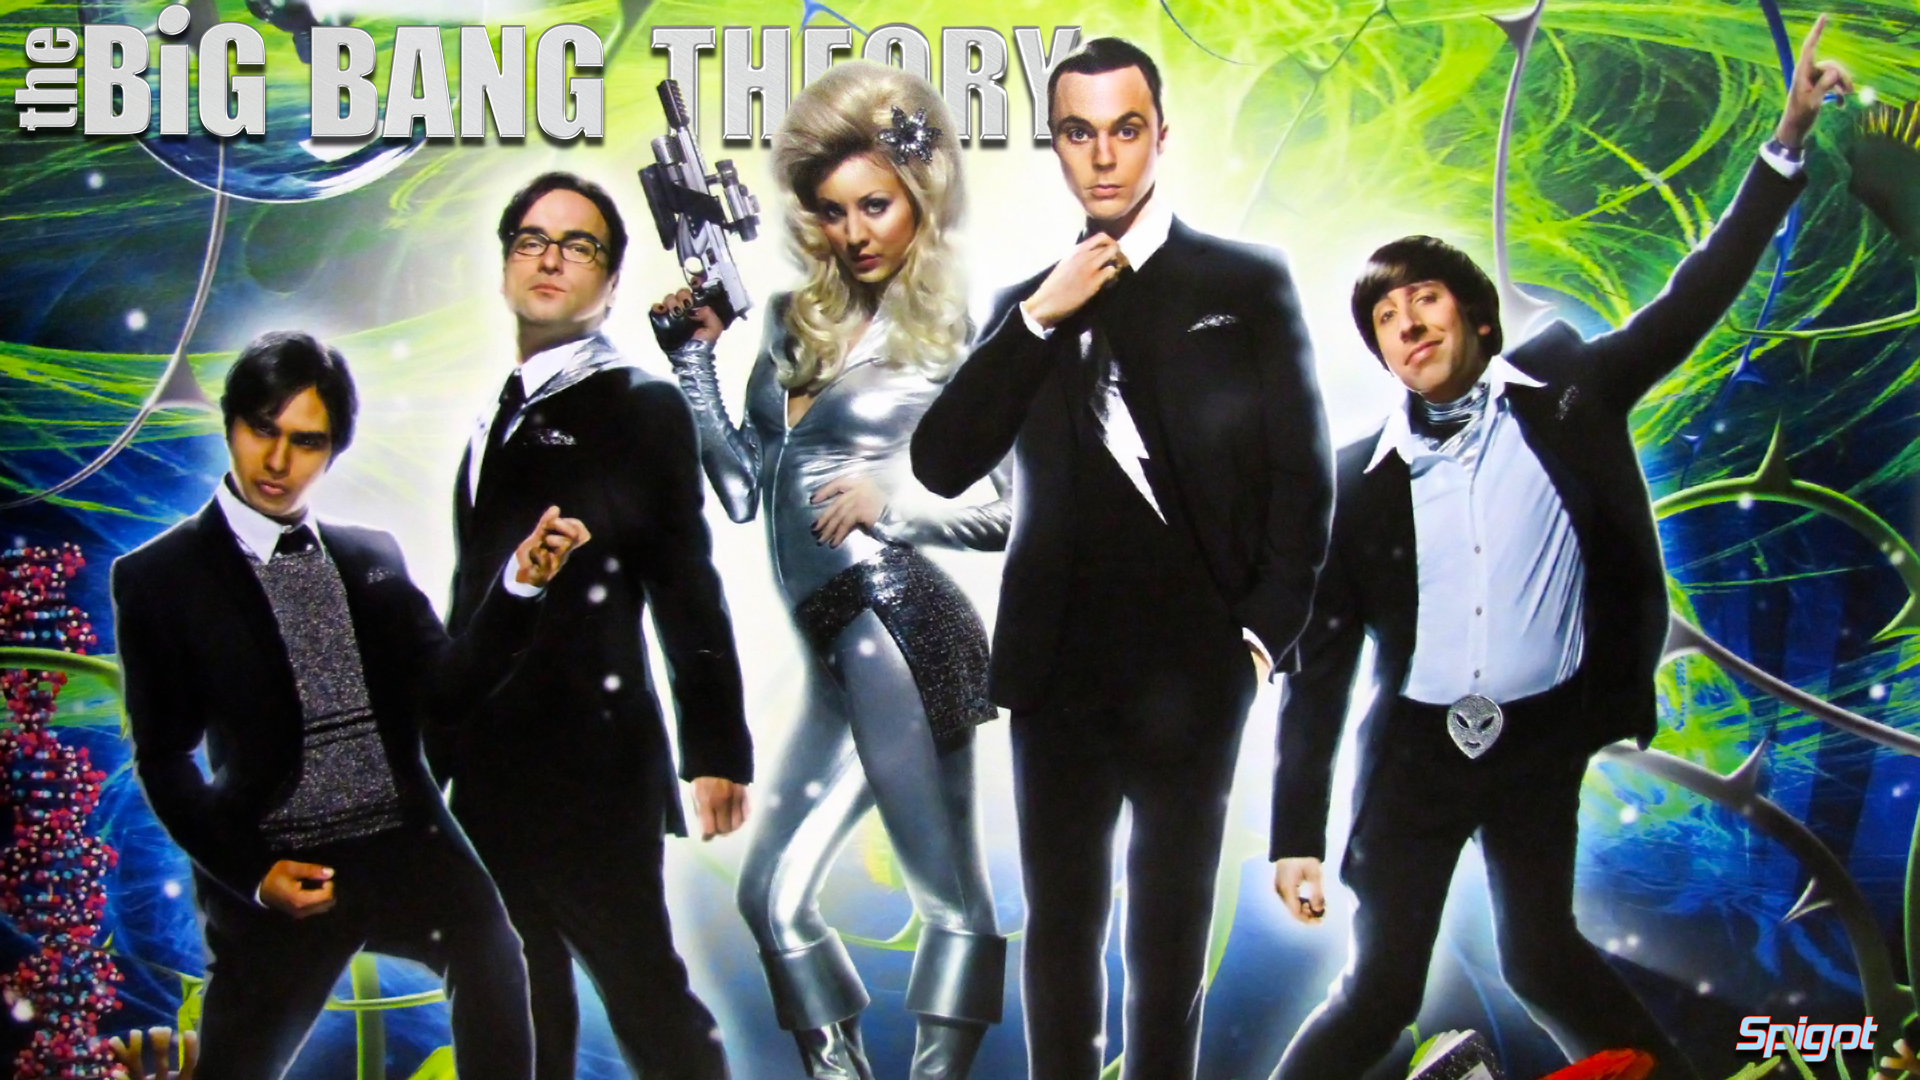 Two more wallpapers of this awesome show The Big Bang Theory